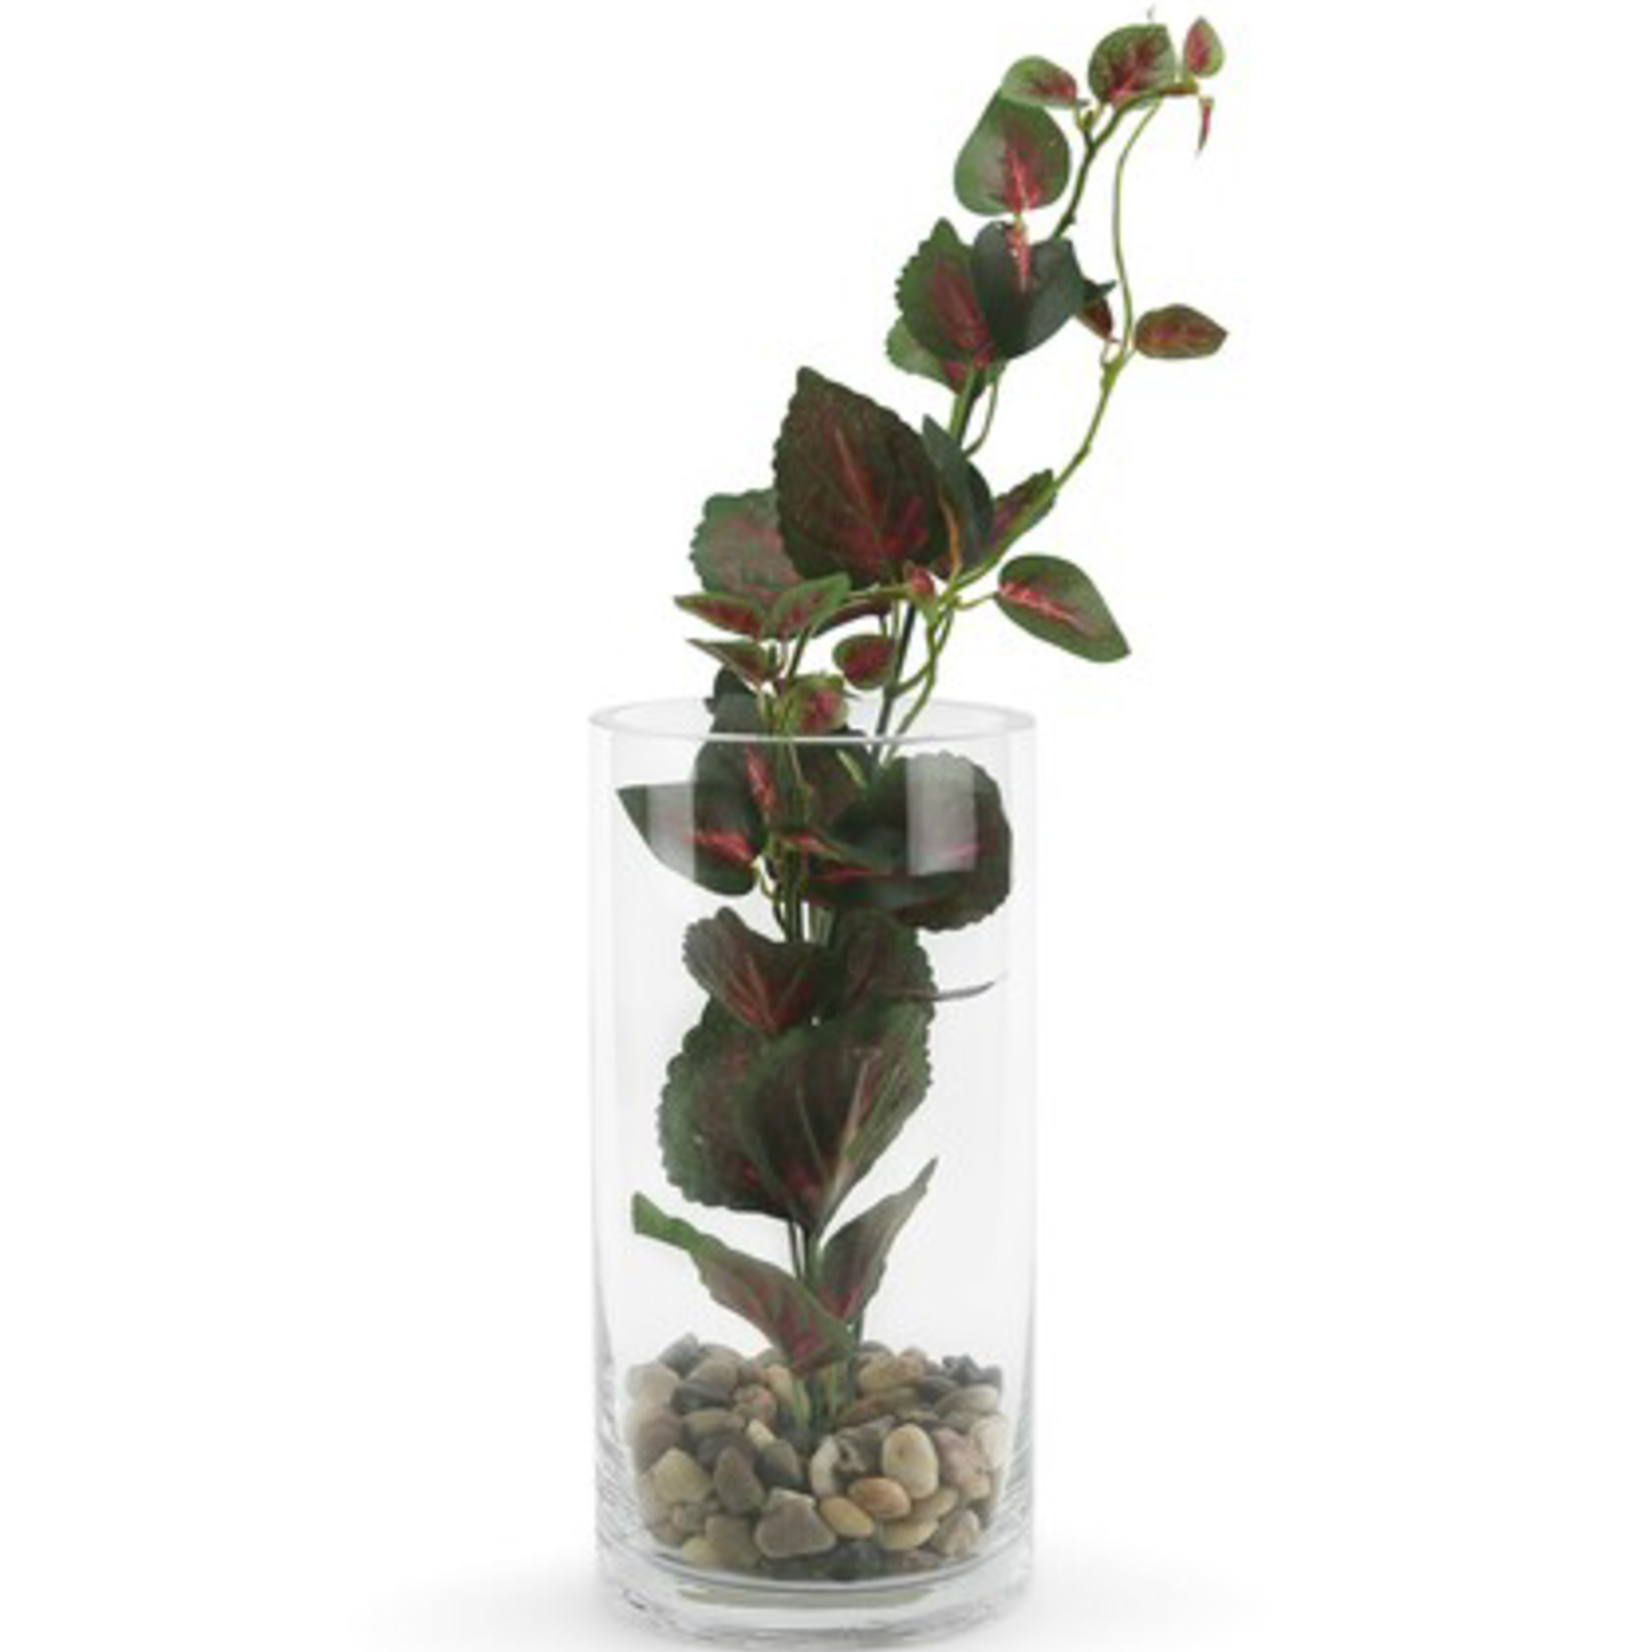 8"H X 4" CLEAR GLASS CYLINDER VASE